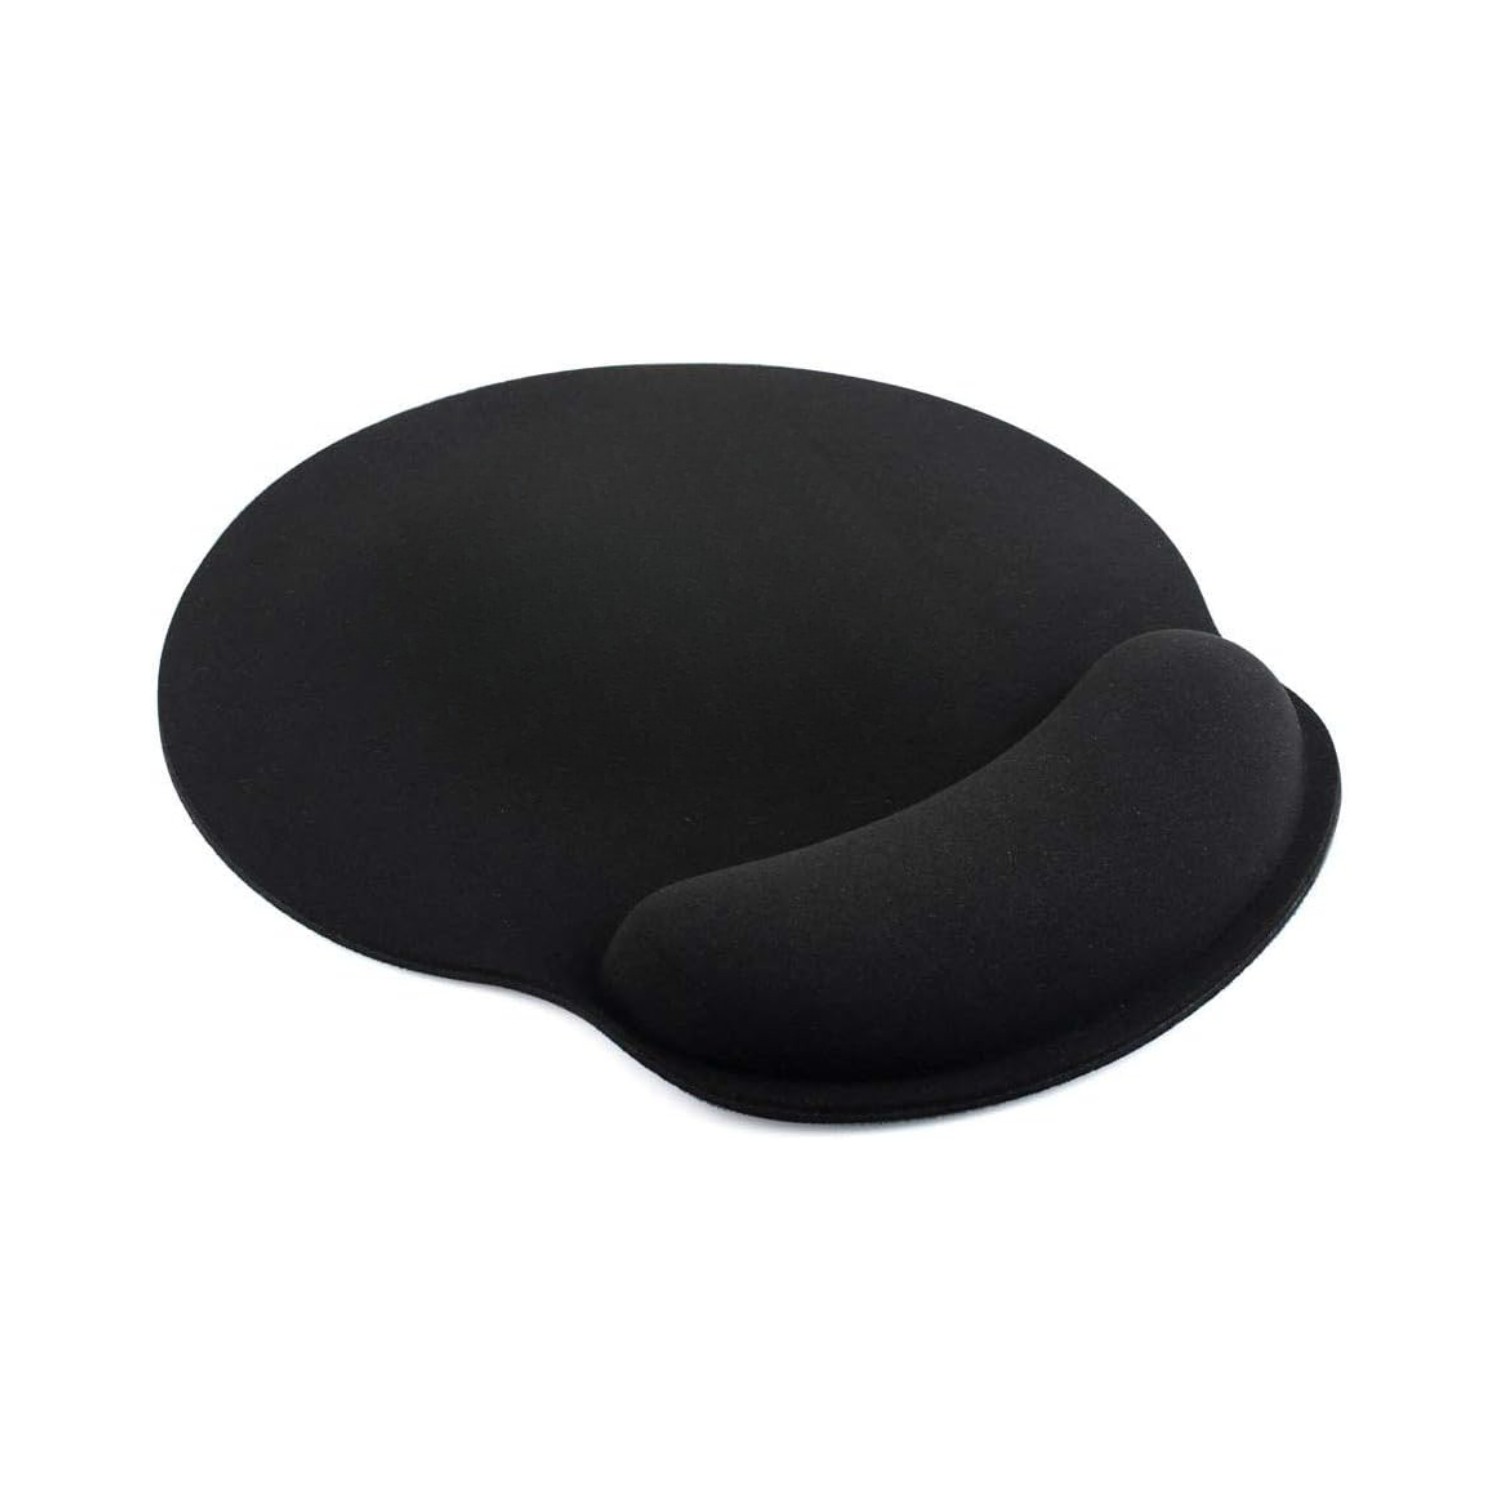 Memory+Foam+Mouse+Pad+With+Wrist+Rest+Black